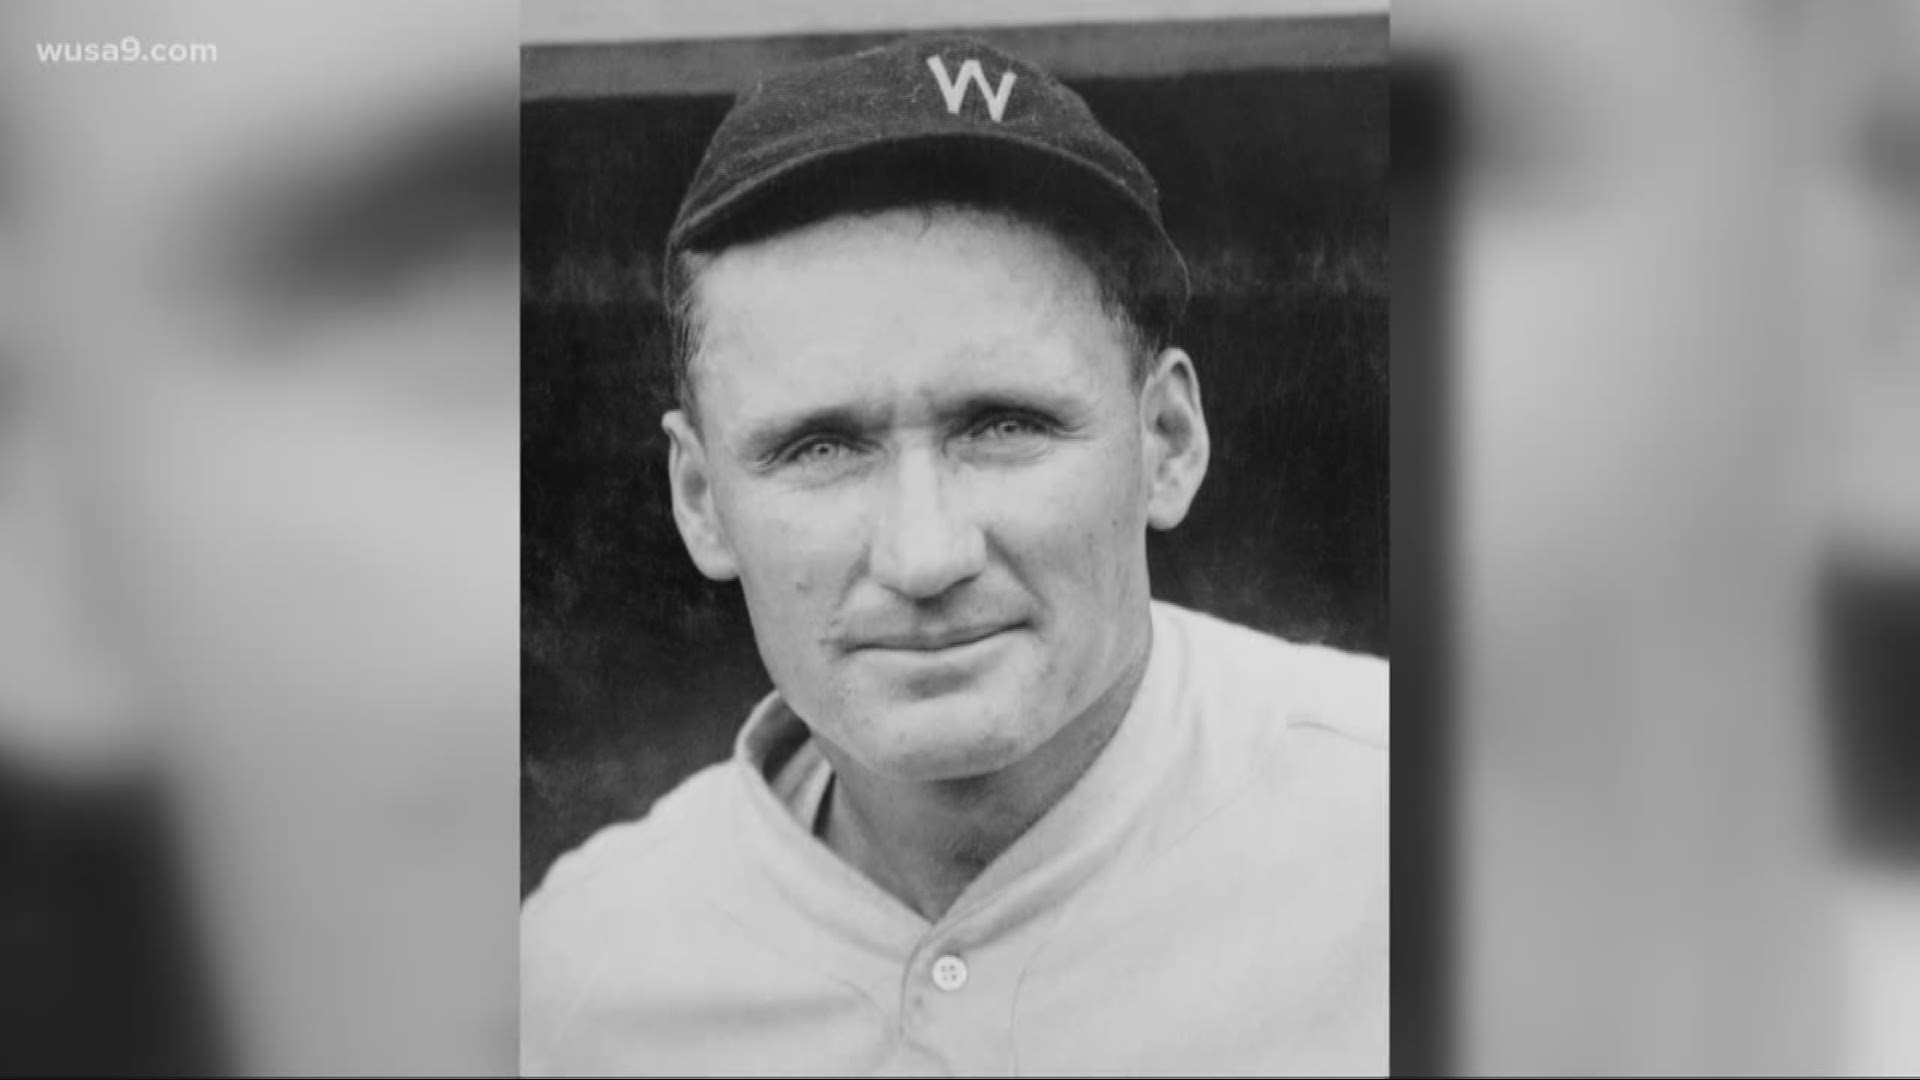 While Scherzer and Strasburg have proven to be some of the Nationals strongest pitchers, many consider Johnson, who played from 1907-1927, one of the greatest yet.